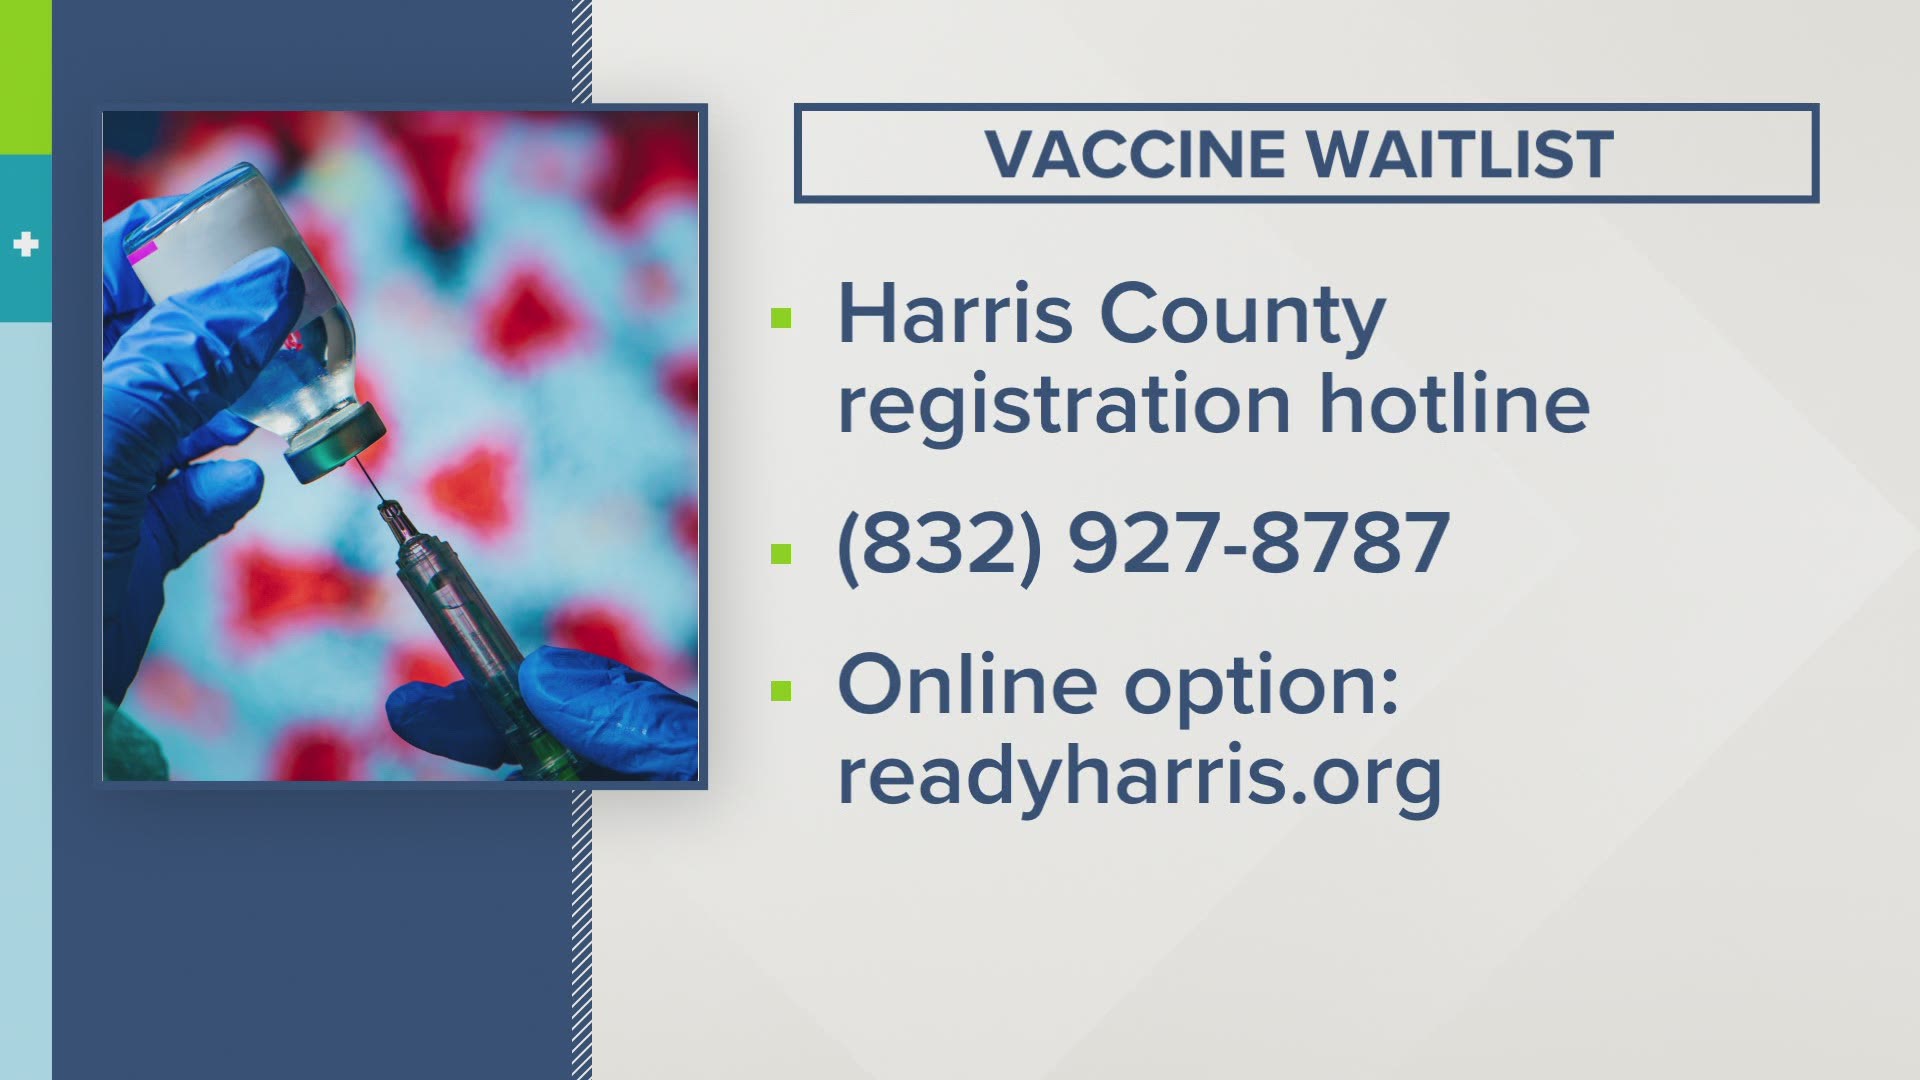 Many Houstonians braved long lines to receive their COVID vaccine now that all adults in Texas are eligible to get the shot.